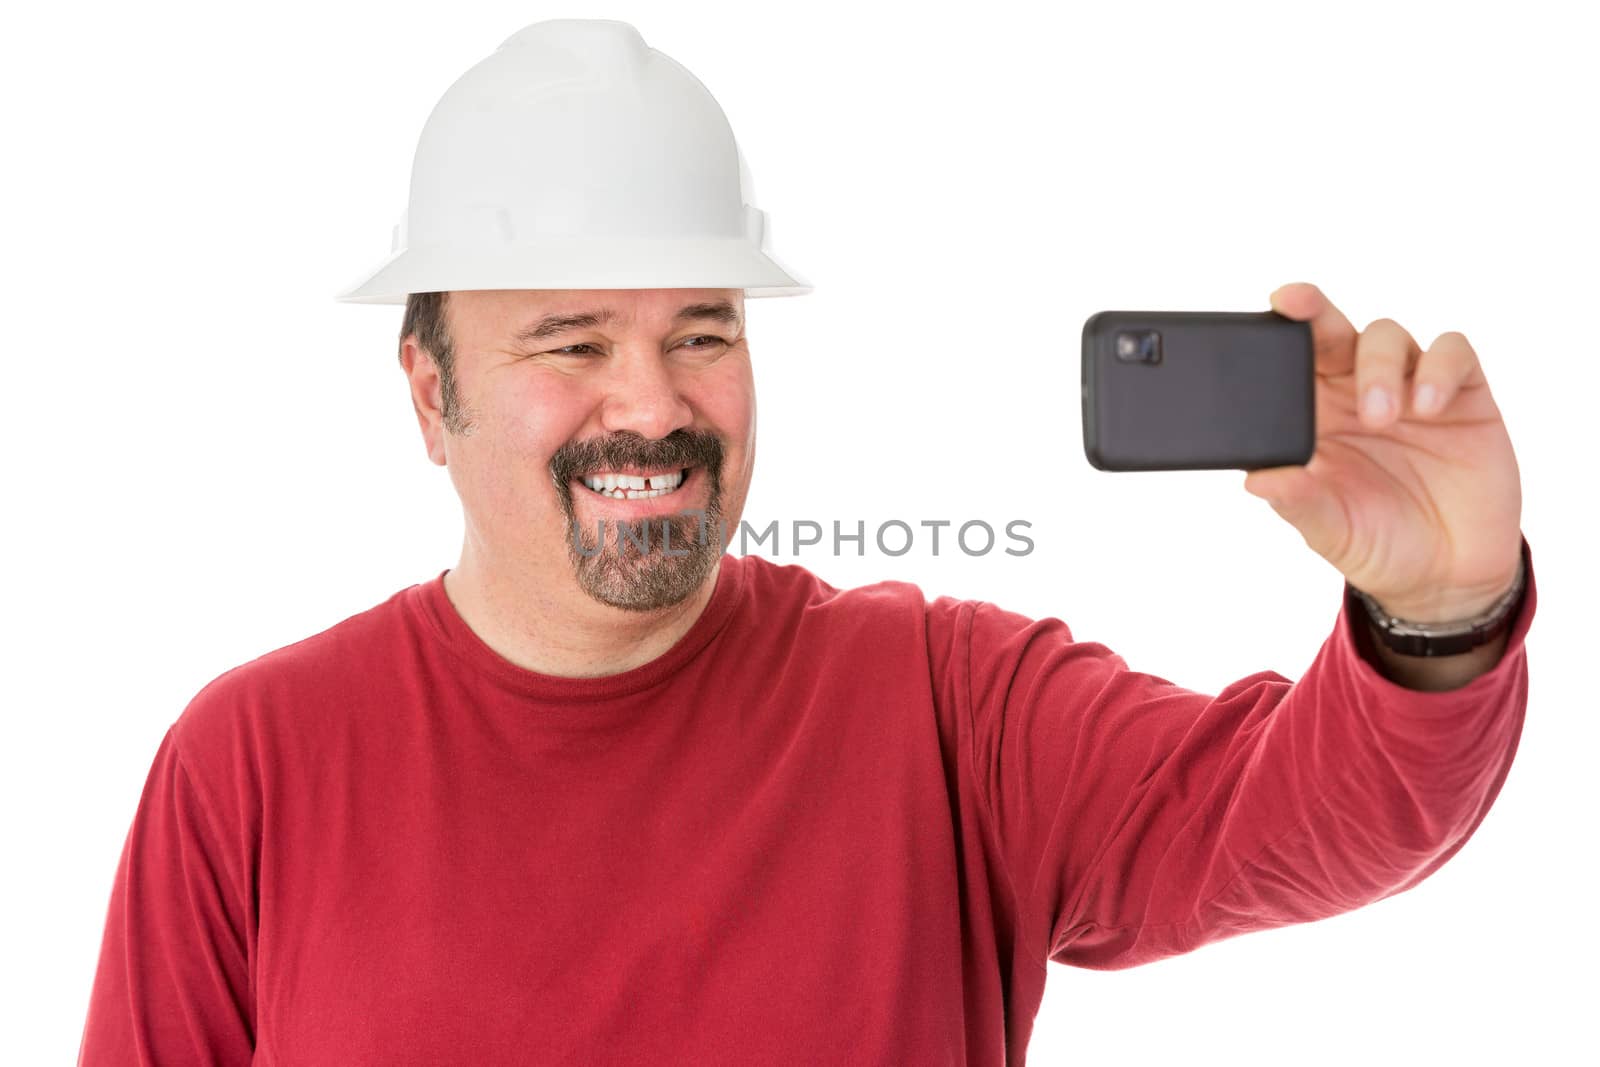 Workman with a neat goatee beard weaning a hardhat posing for a self-portrait giving a cheesy grin as he looks into the camera on his mobile phone, isolated on white